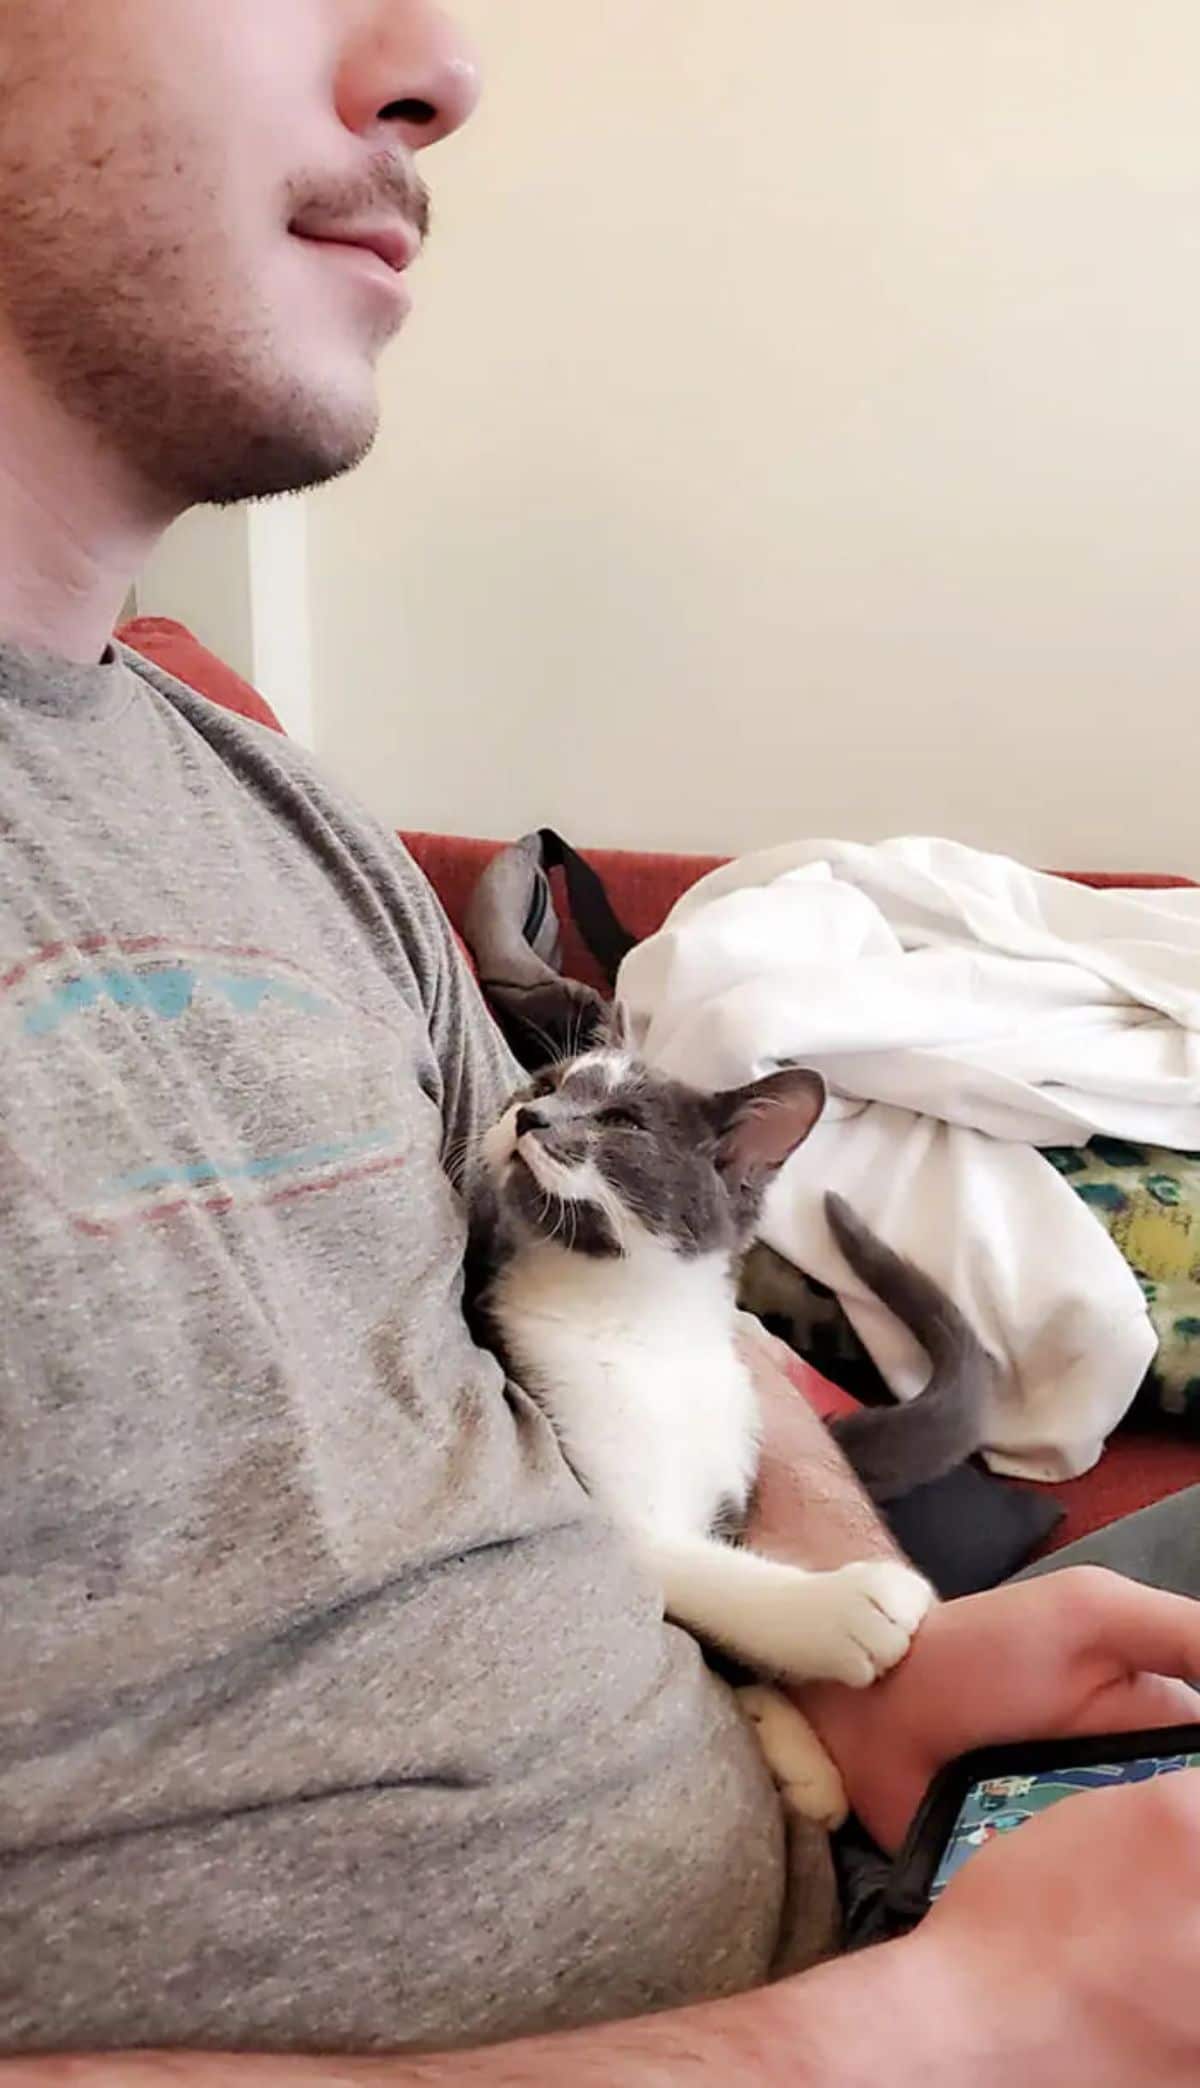 grey and white kitten being held by a man wearing grey and is looking up at him